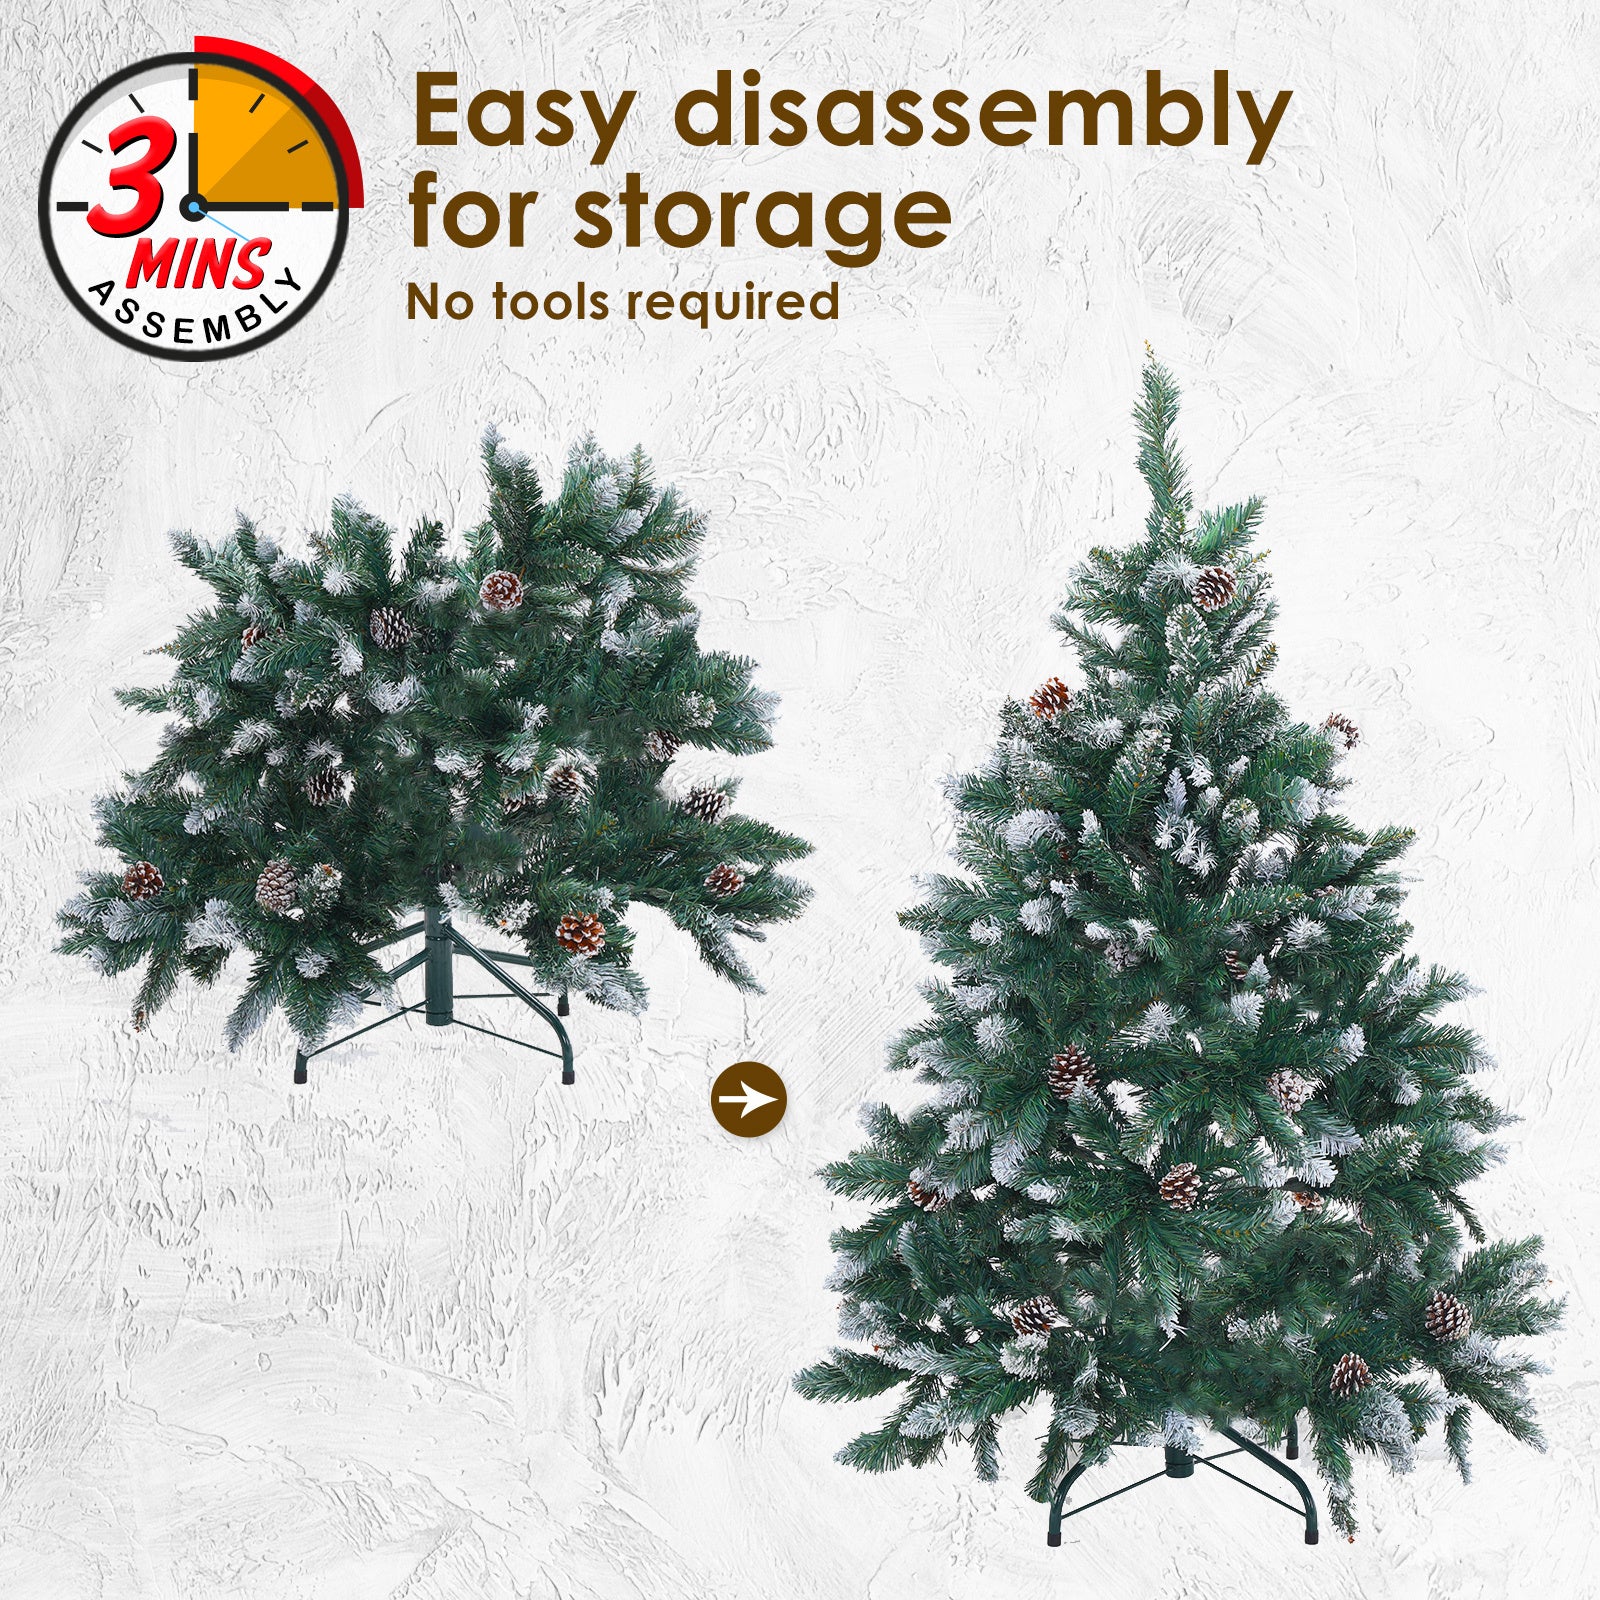 Home Ready 4Ft 120cm 390 tips Green Snowy Christmas Tree Xmas Pine Cones + Bauble Balls Deals499